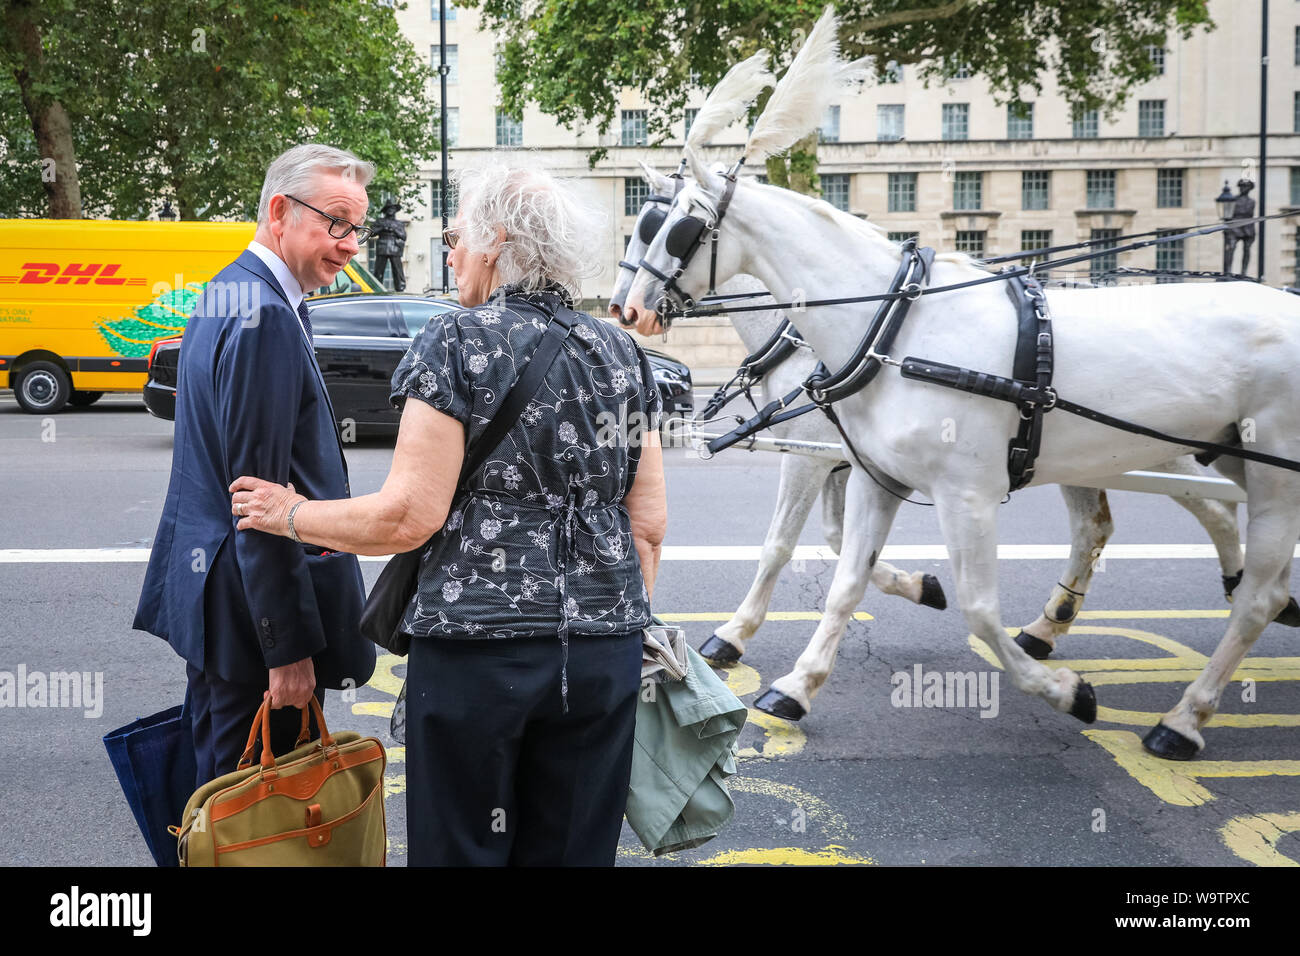 London, UK. 15th Aug, 2019.  Michael Gove, Chancellor of the Duchy of Lancaster with responsibility for no-deal Brexit preparations, as well as overseeing constitutional affairs, maintaining the integrity of the Union and having oversight over all Cabinet Office policy, exits the Cabinet Office in Whitehall and chats to a woman as a horse-drawn carriage goes past them. Credit: Imageplotter/Alamy Live News Stock Photo